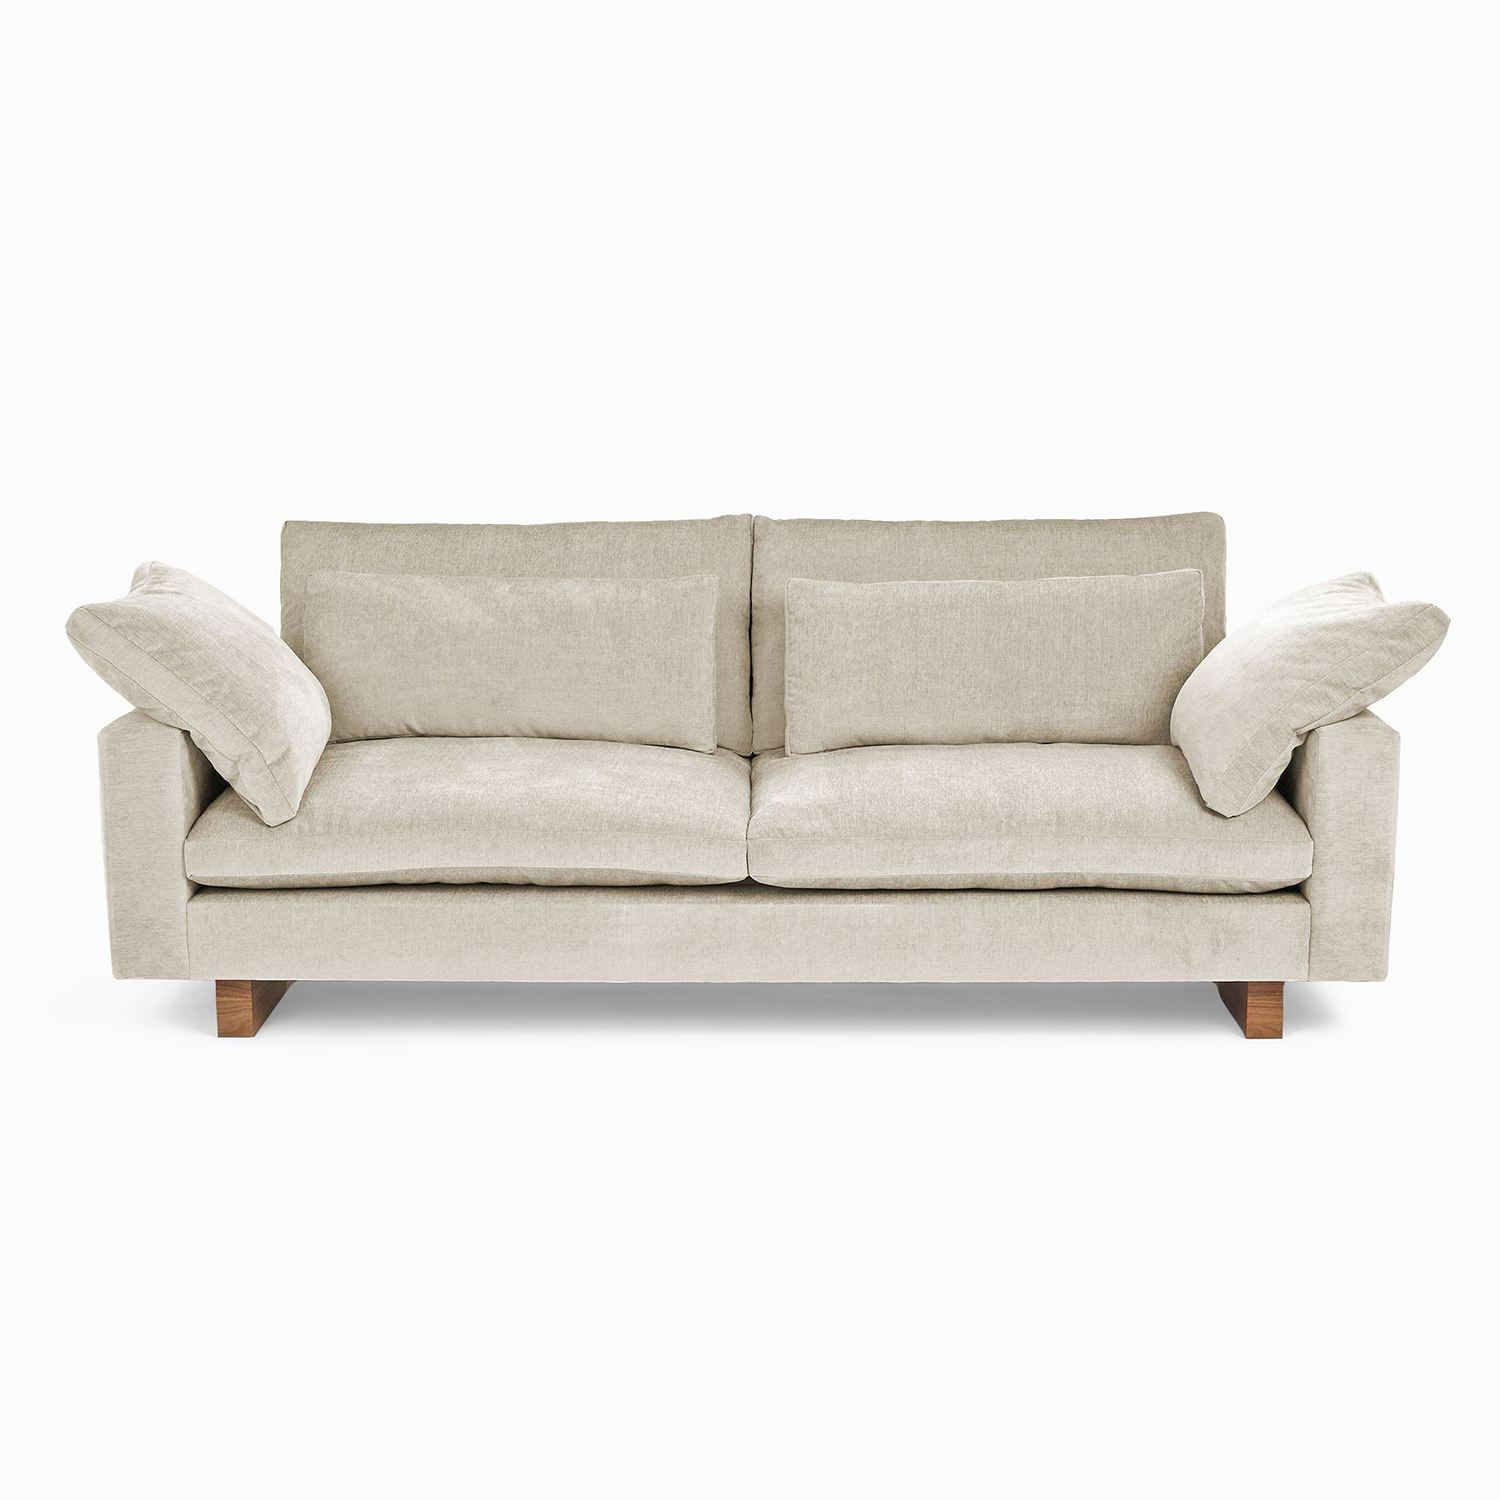 deep seat velvet sofa from west elm with wood legs